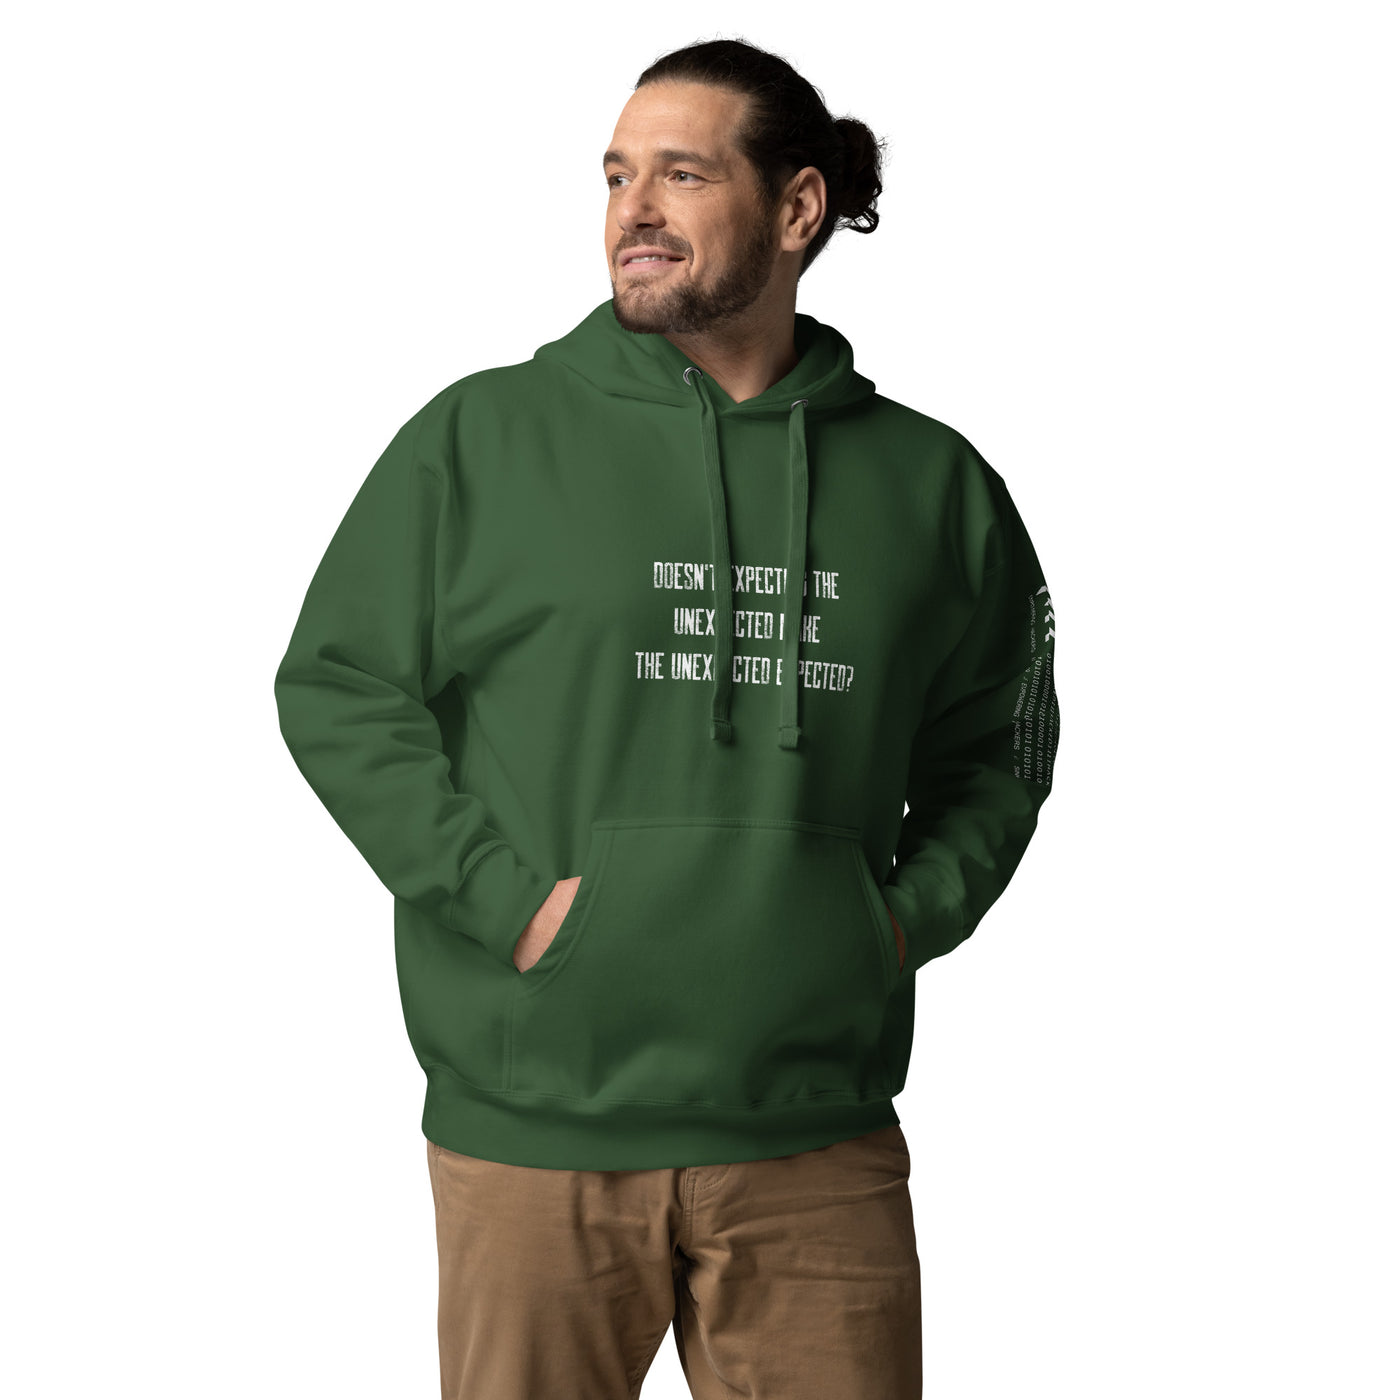 Doesn't expecting the unexpected make the unexpected expected V2 - Unisex Hoodie